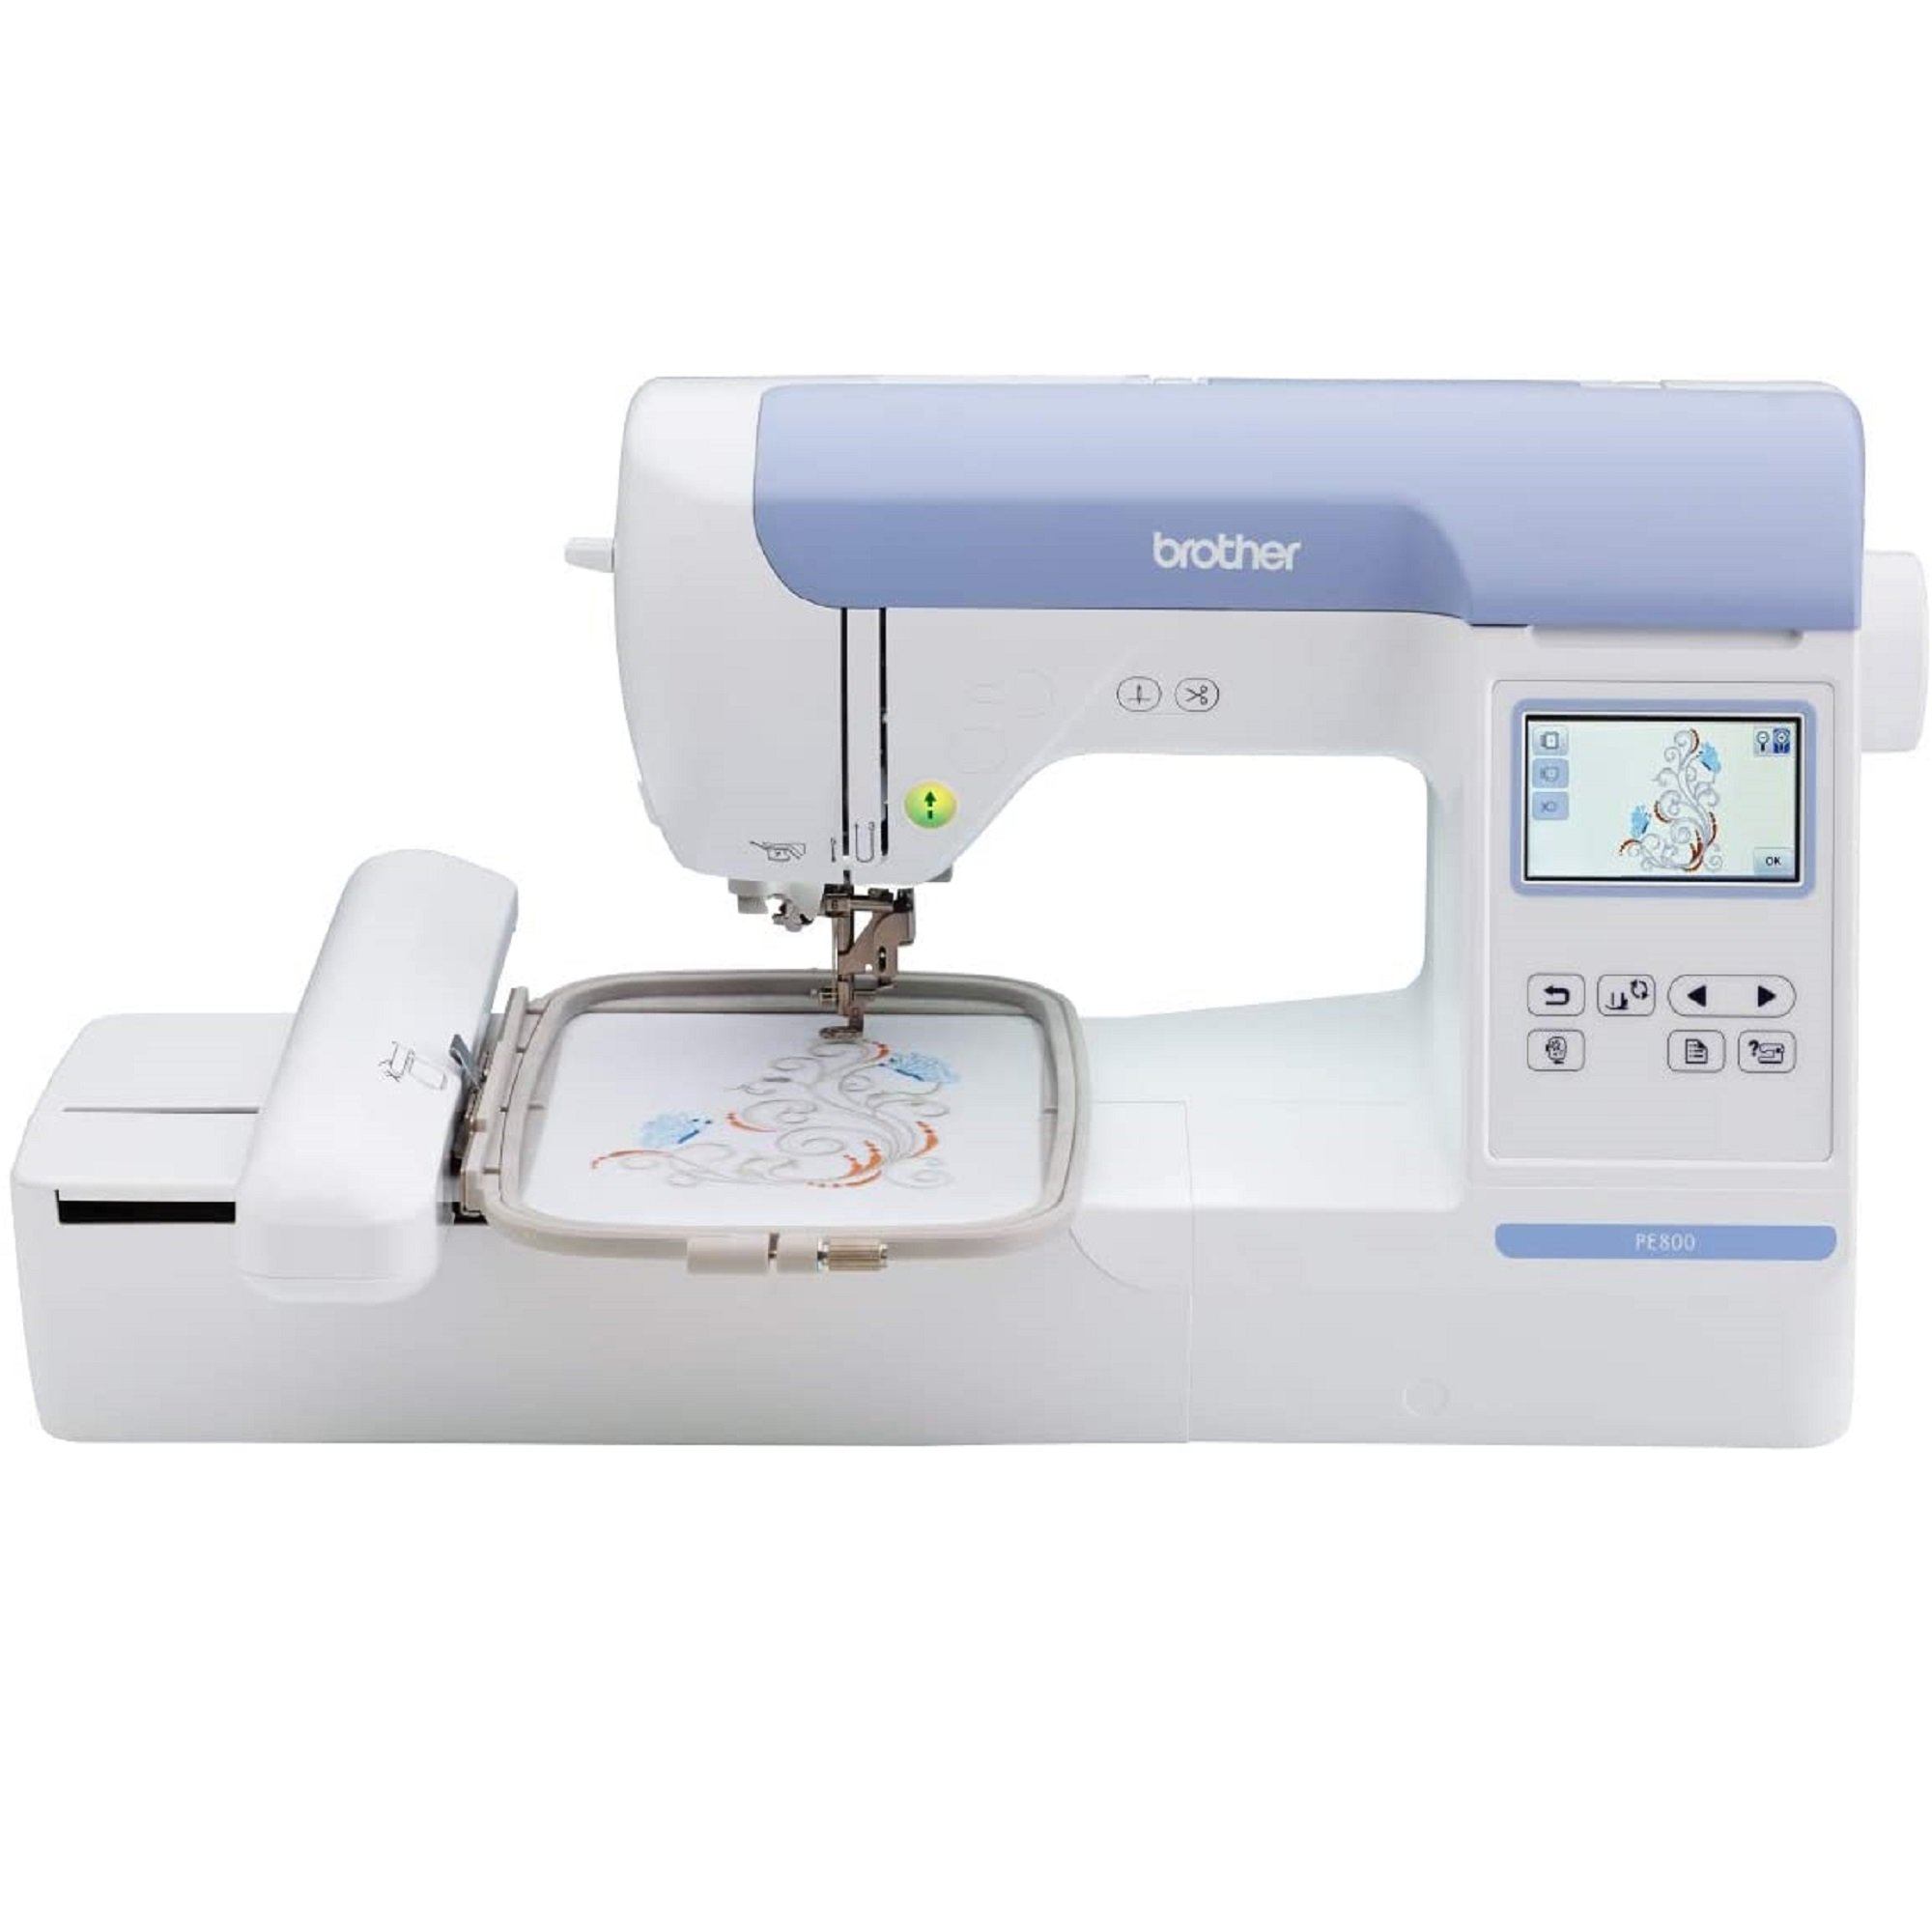  Brother Embroidery Machine, PE770, 5” x 7” Embroidery